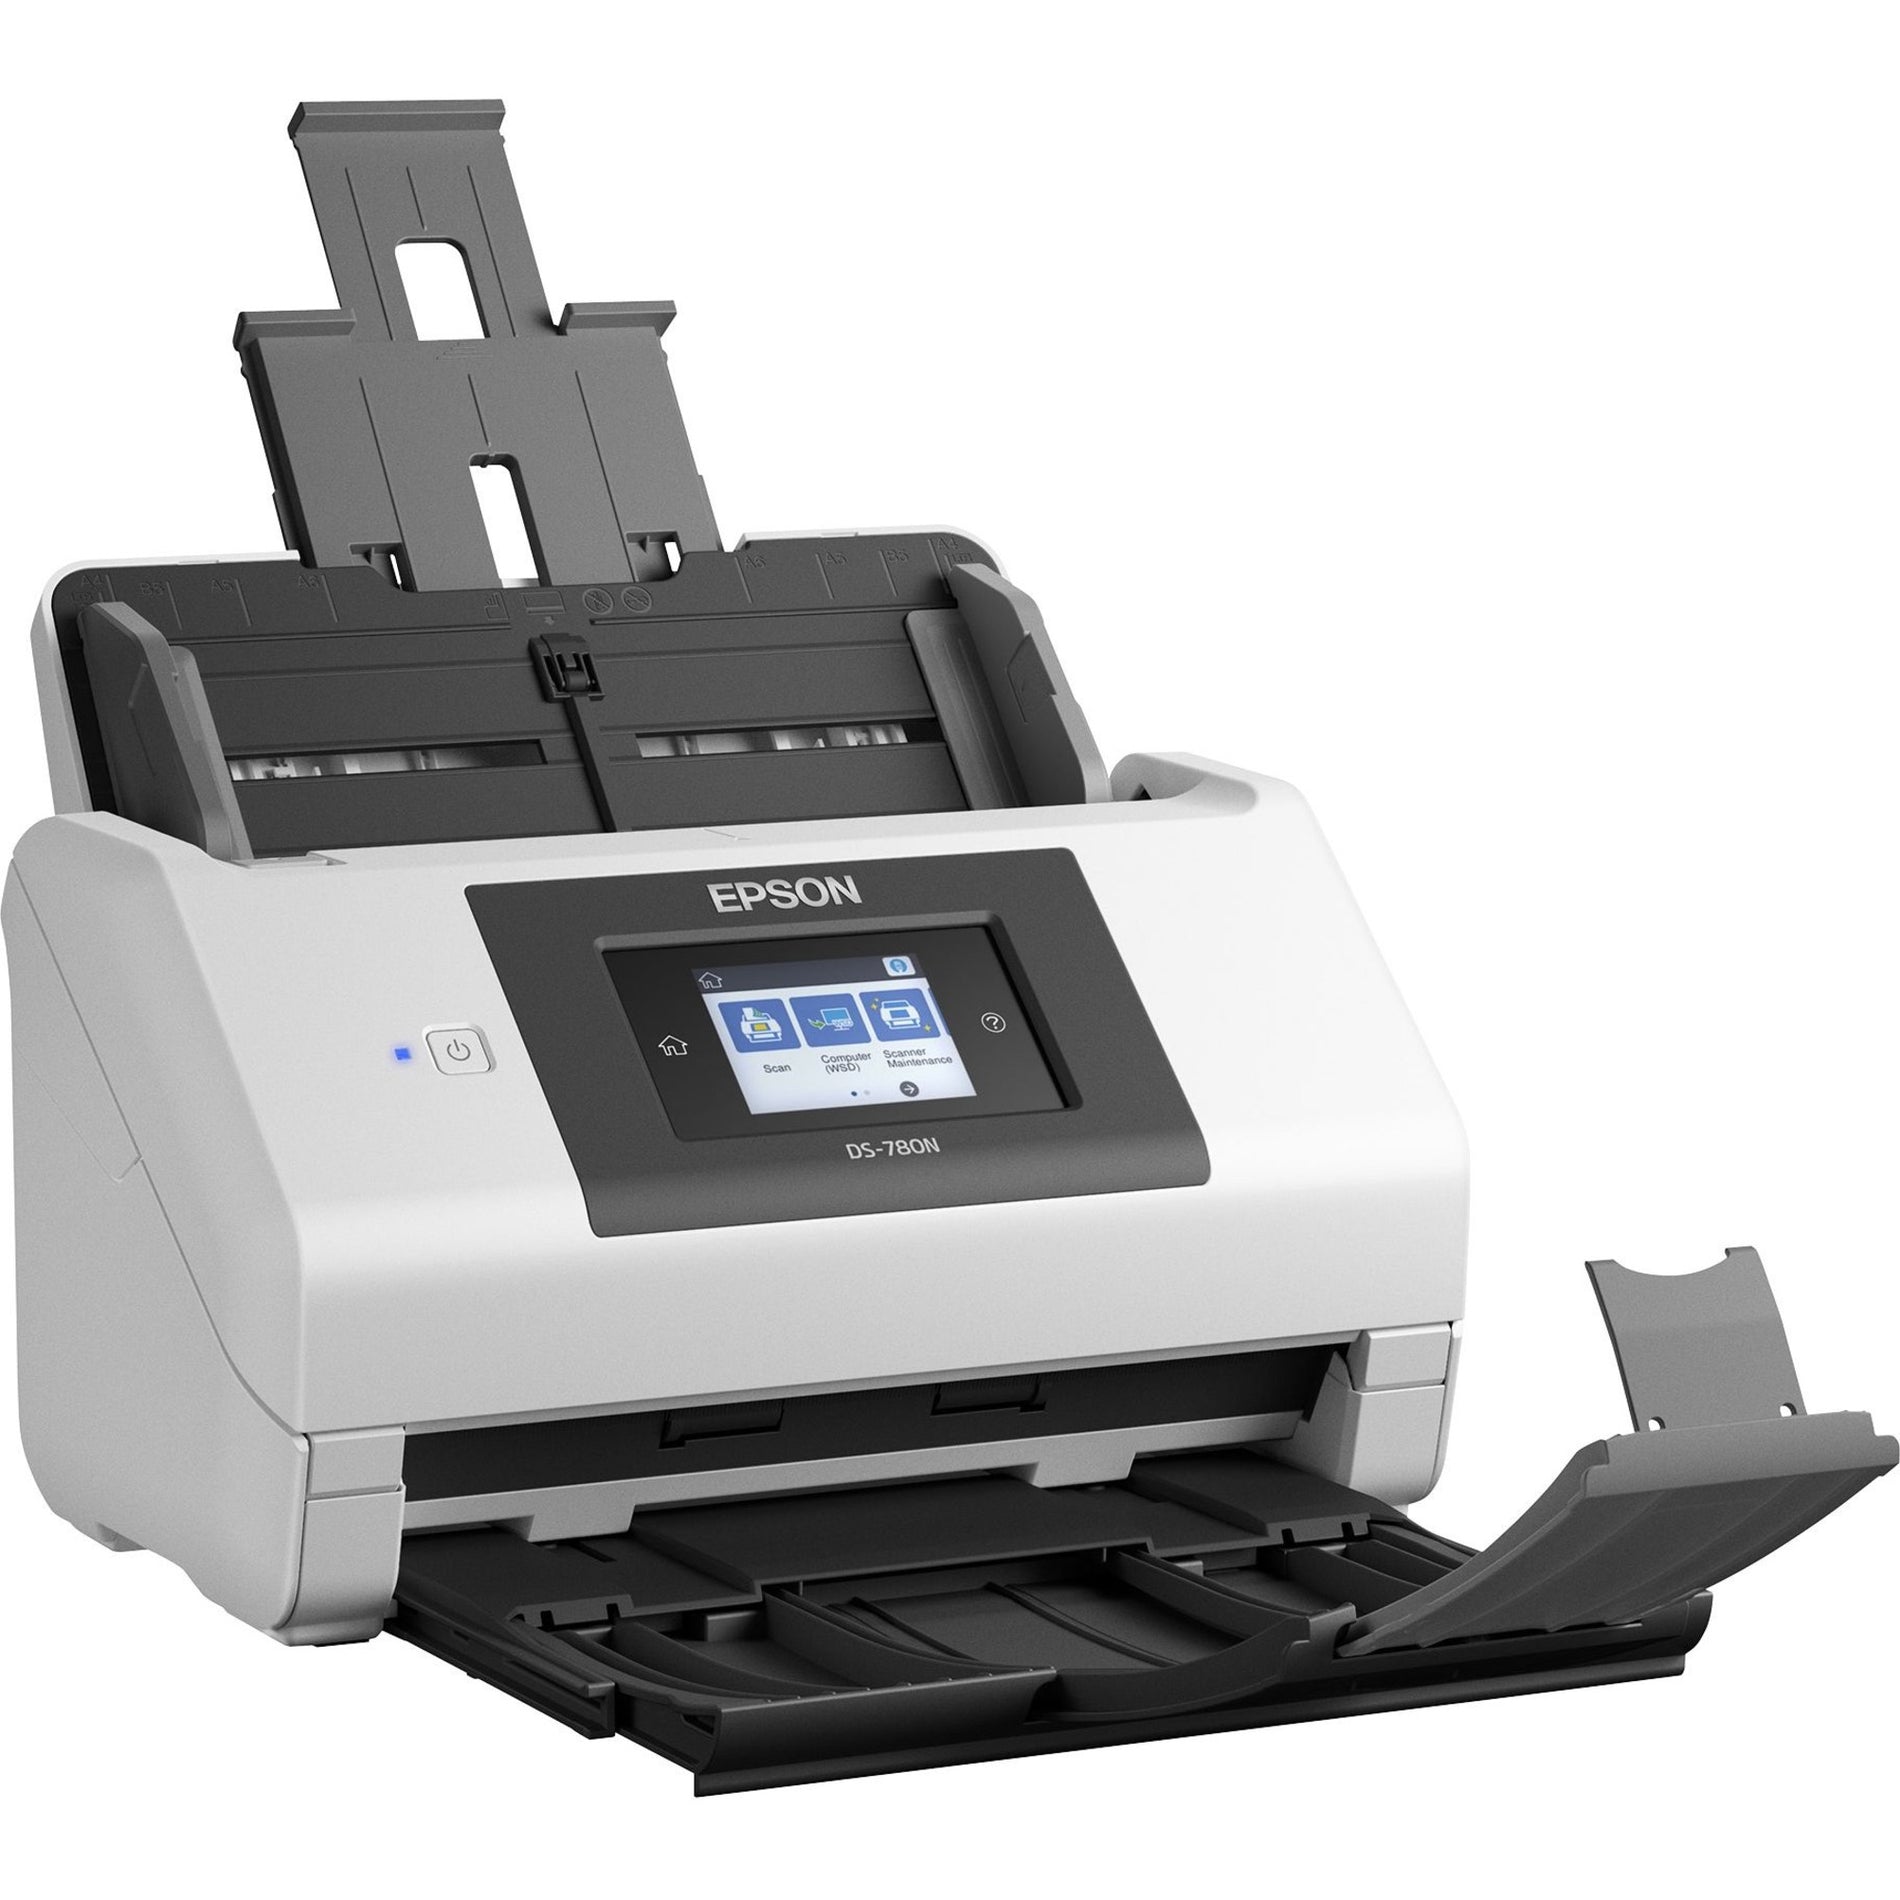 Epson B11B227201 DS-780N Network Color Document Scanner, 600 dpi Optical, Duplex Scanning, 100 Sheets ADF Capacity